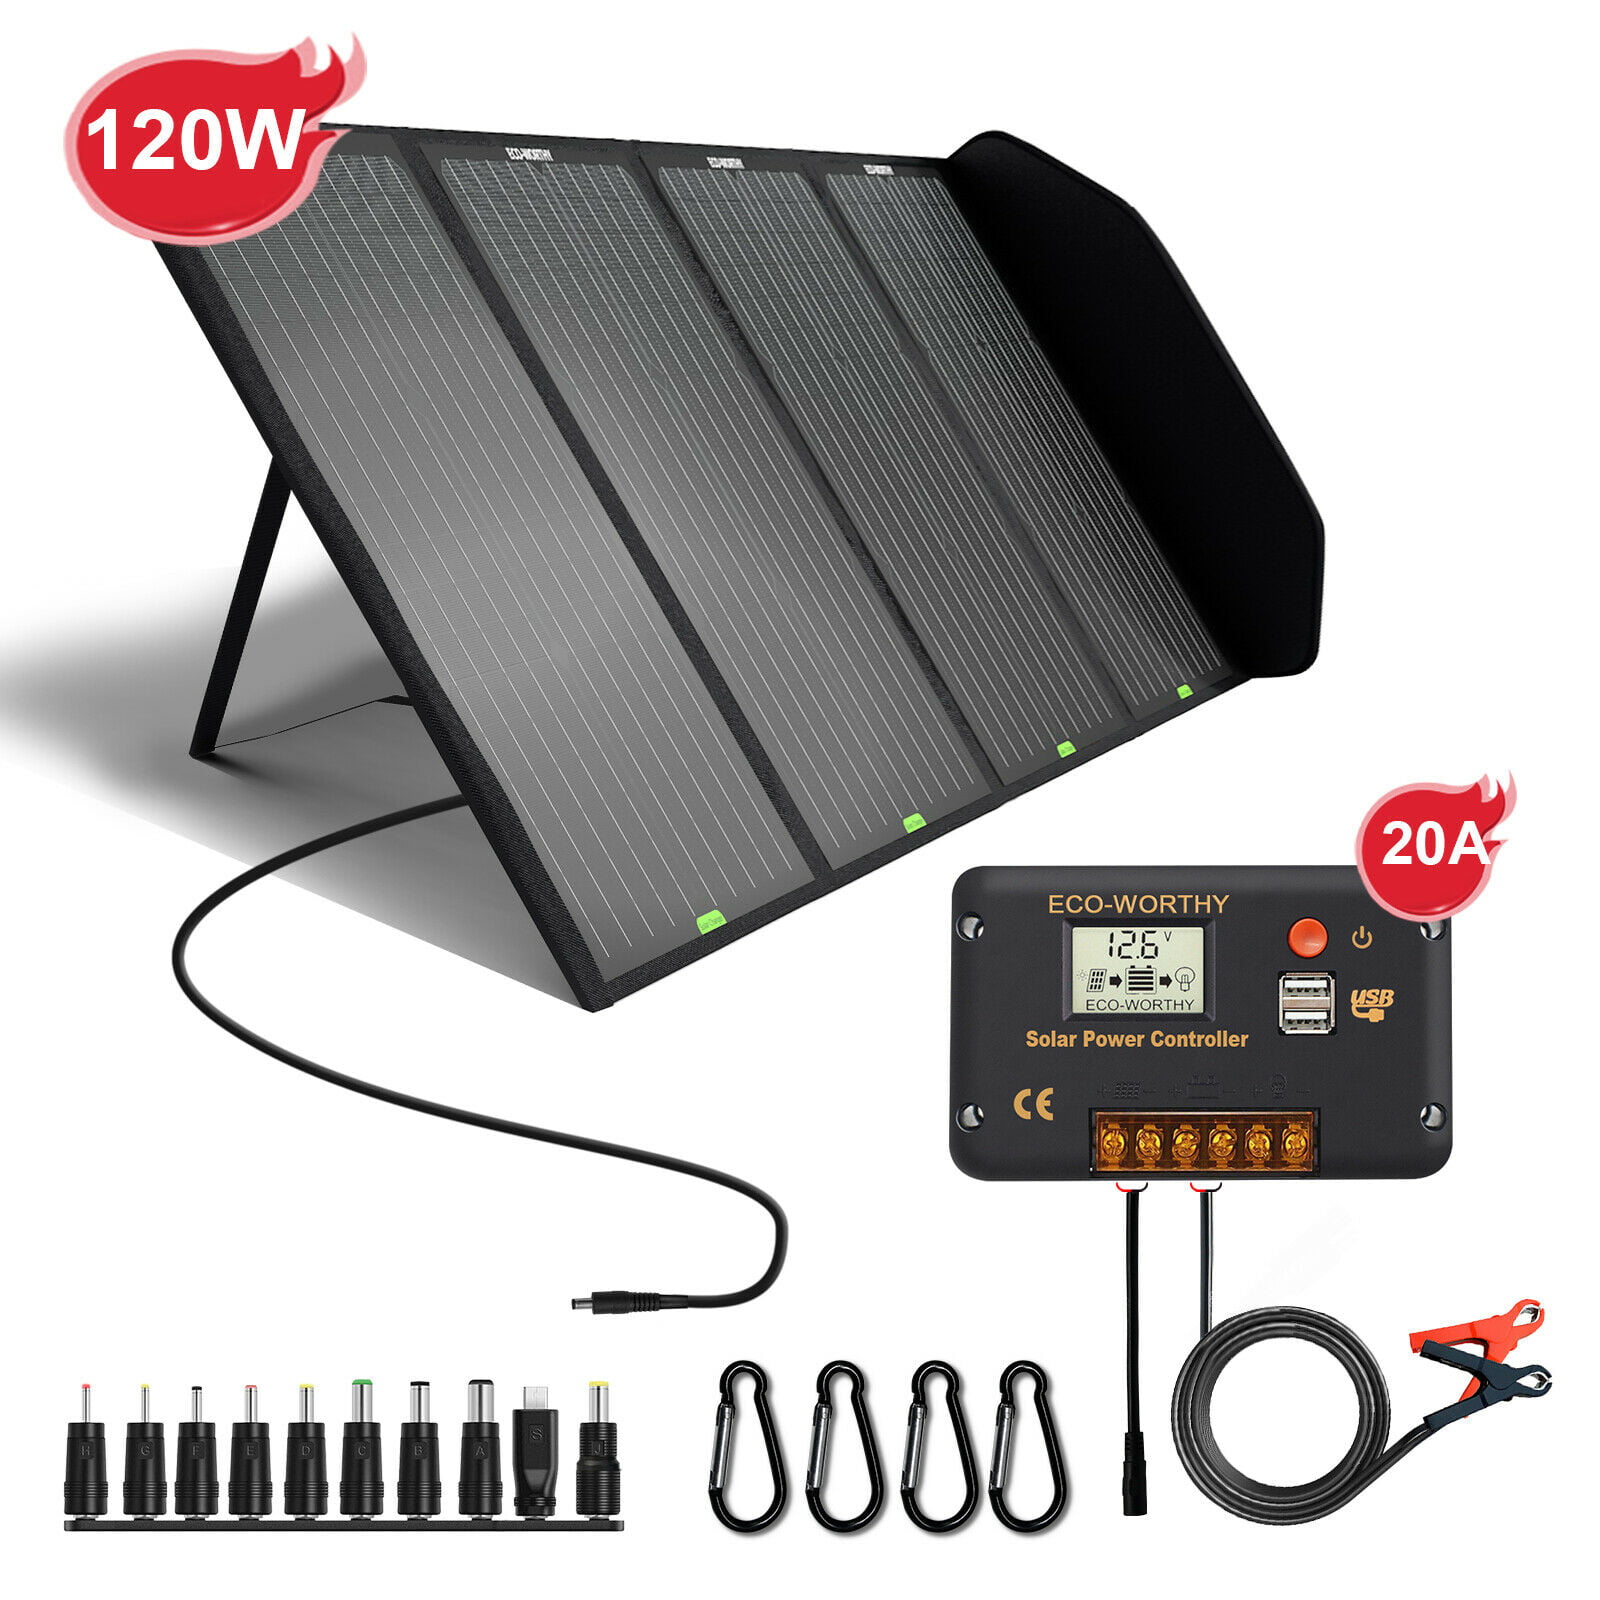 couply 120W Foldable Solar Panel Metal Joint Portable Power Station Generator and USB Devices Accessories 